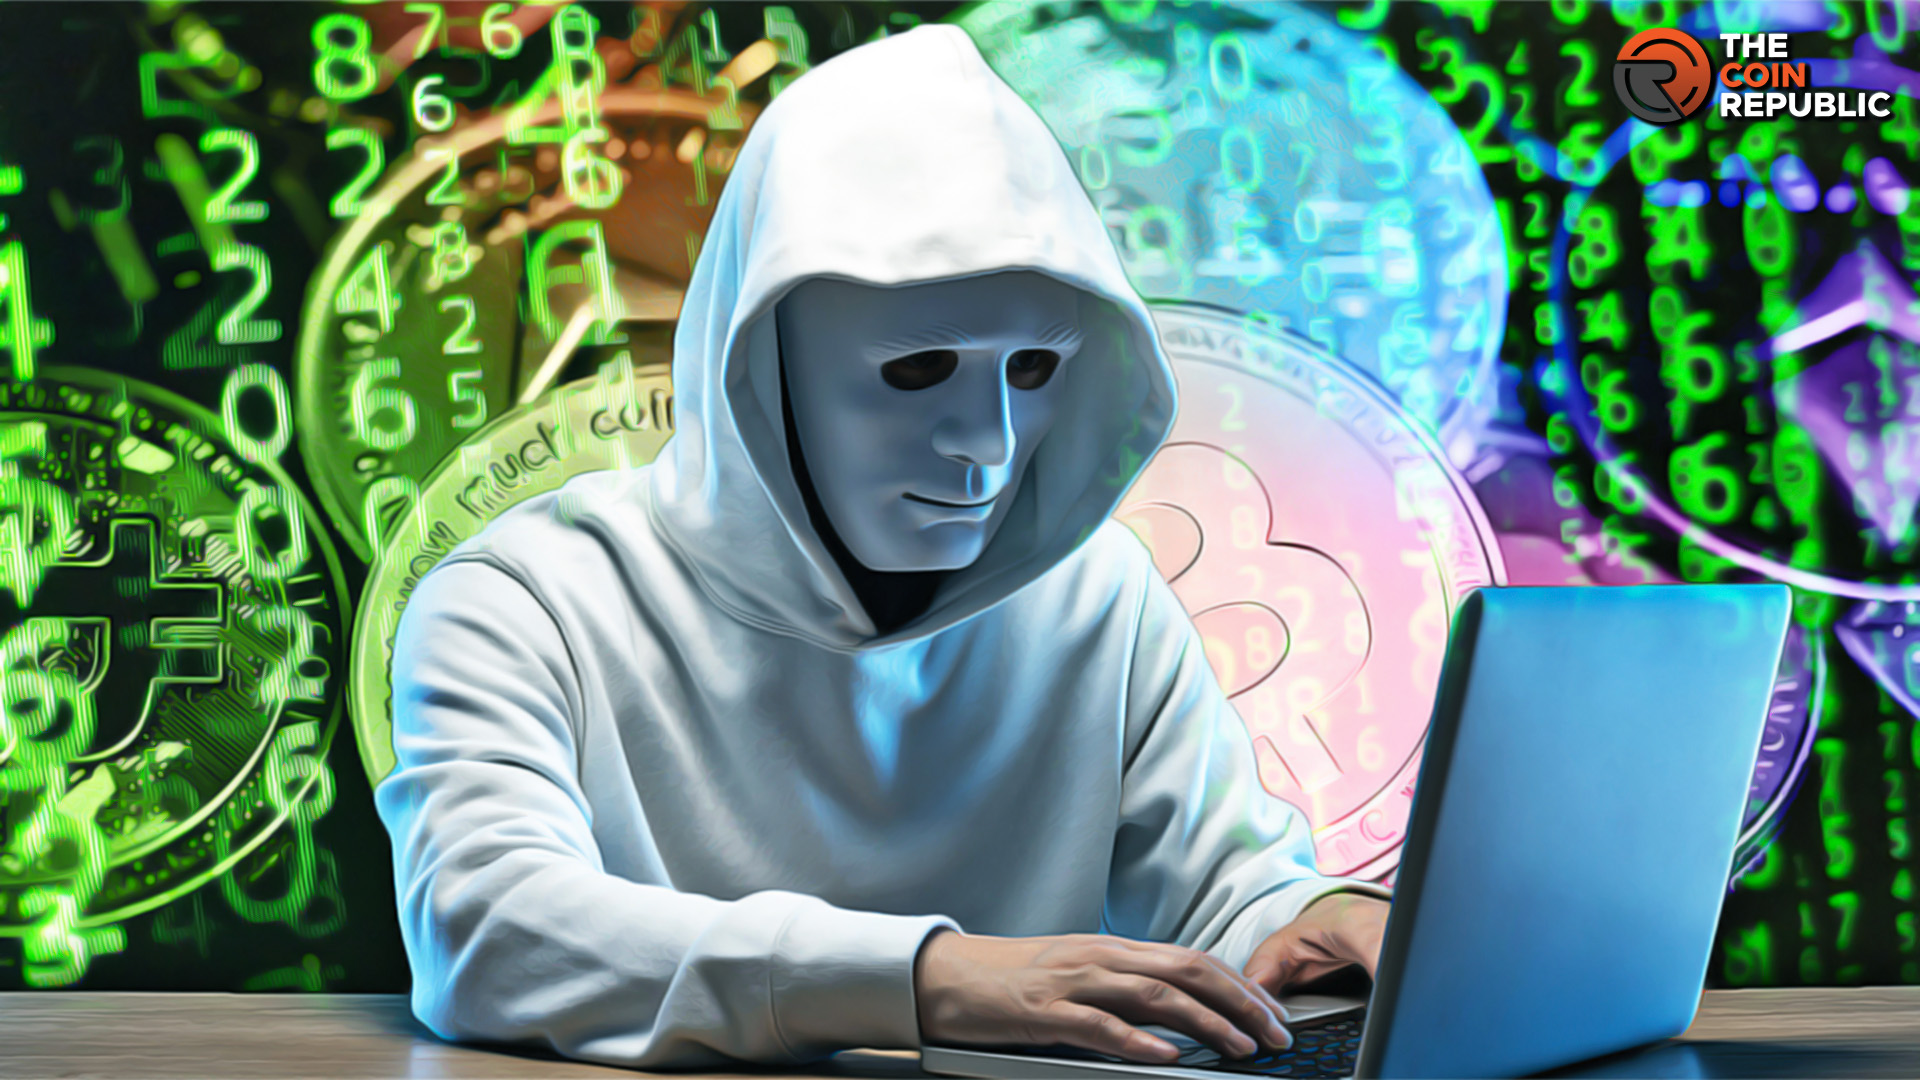 Millions in Crypto Stolen From 63k Users via Crypto, NFT Ads: Reports